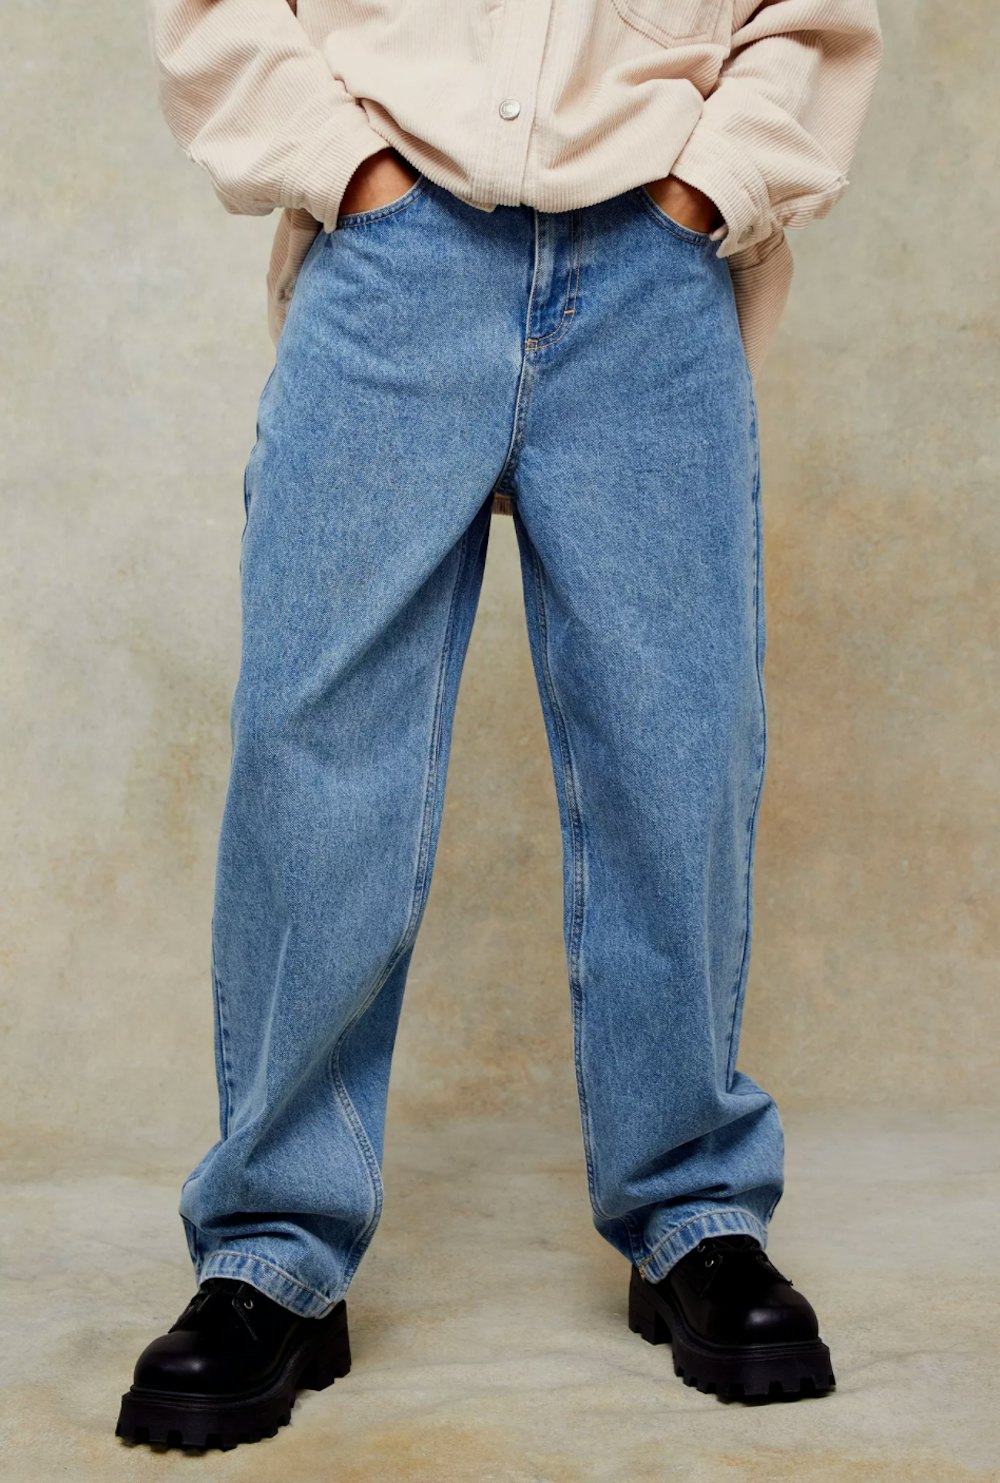 The Baggy Jean Is The Next '90s Trend You Need In Your Spring Closet